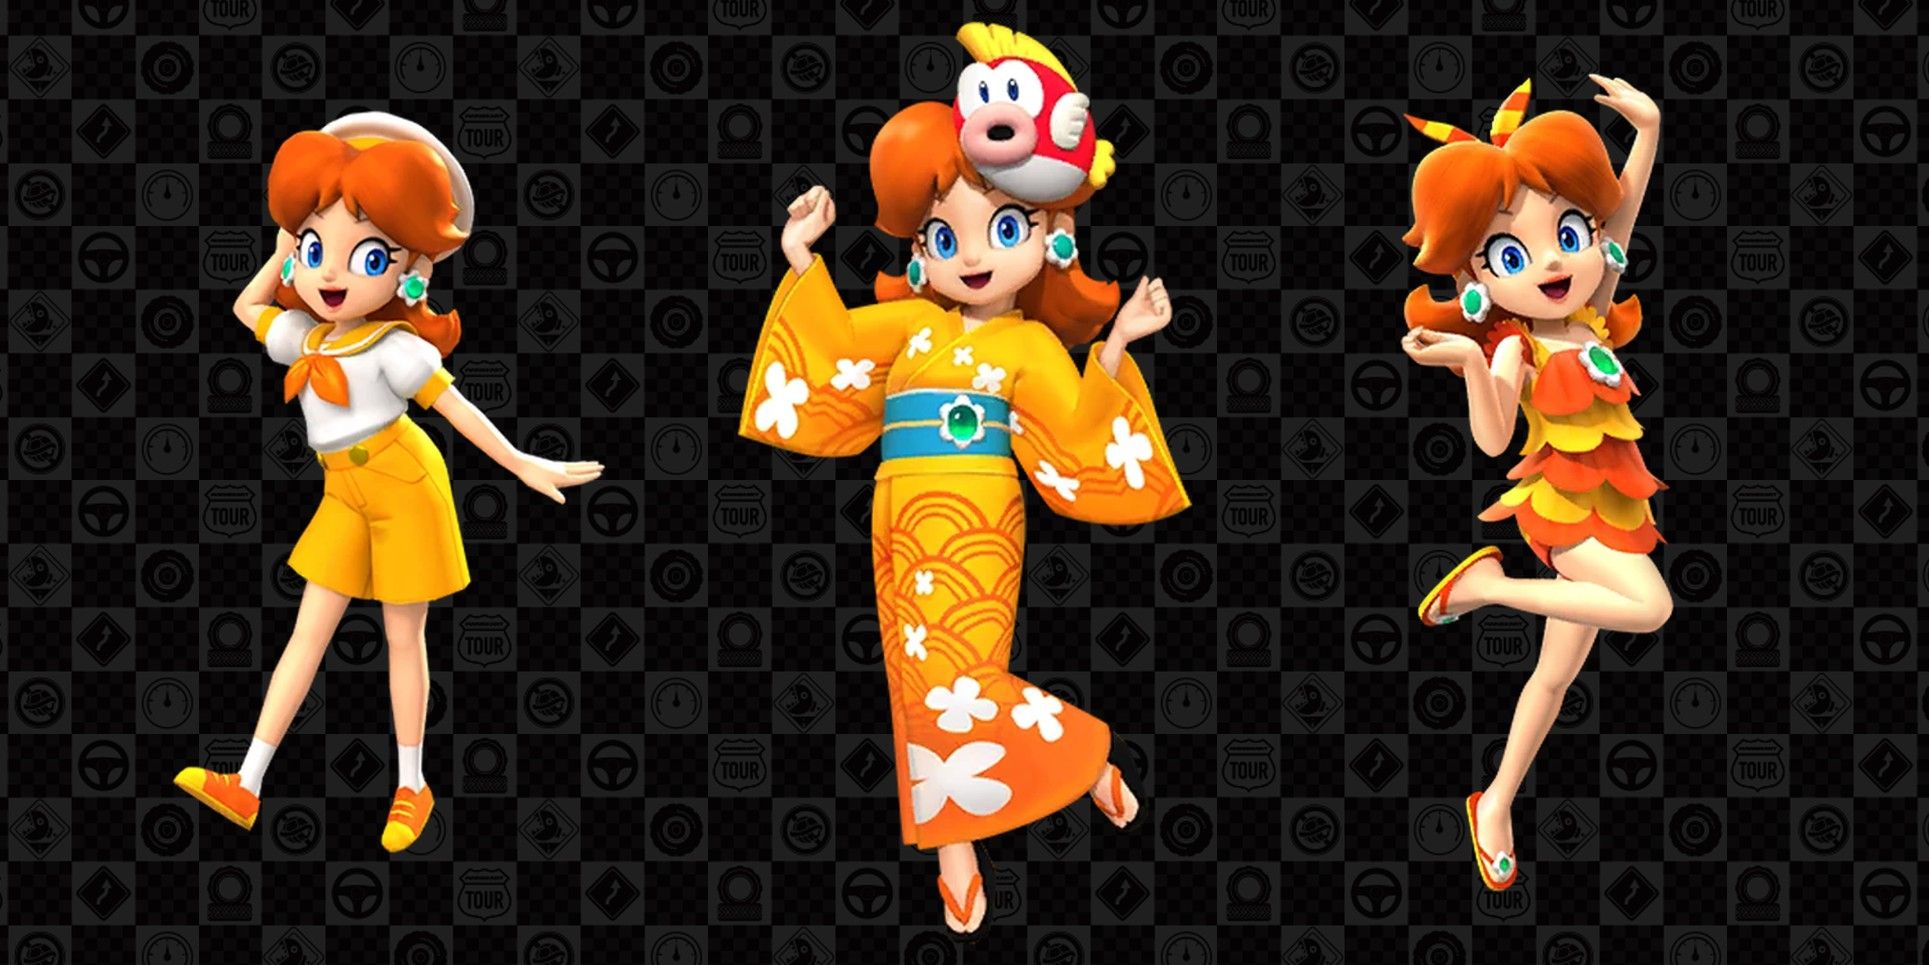 An image compositing Princess Daisy from Mario in various outfits